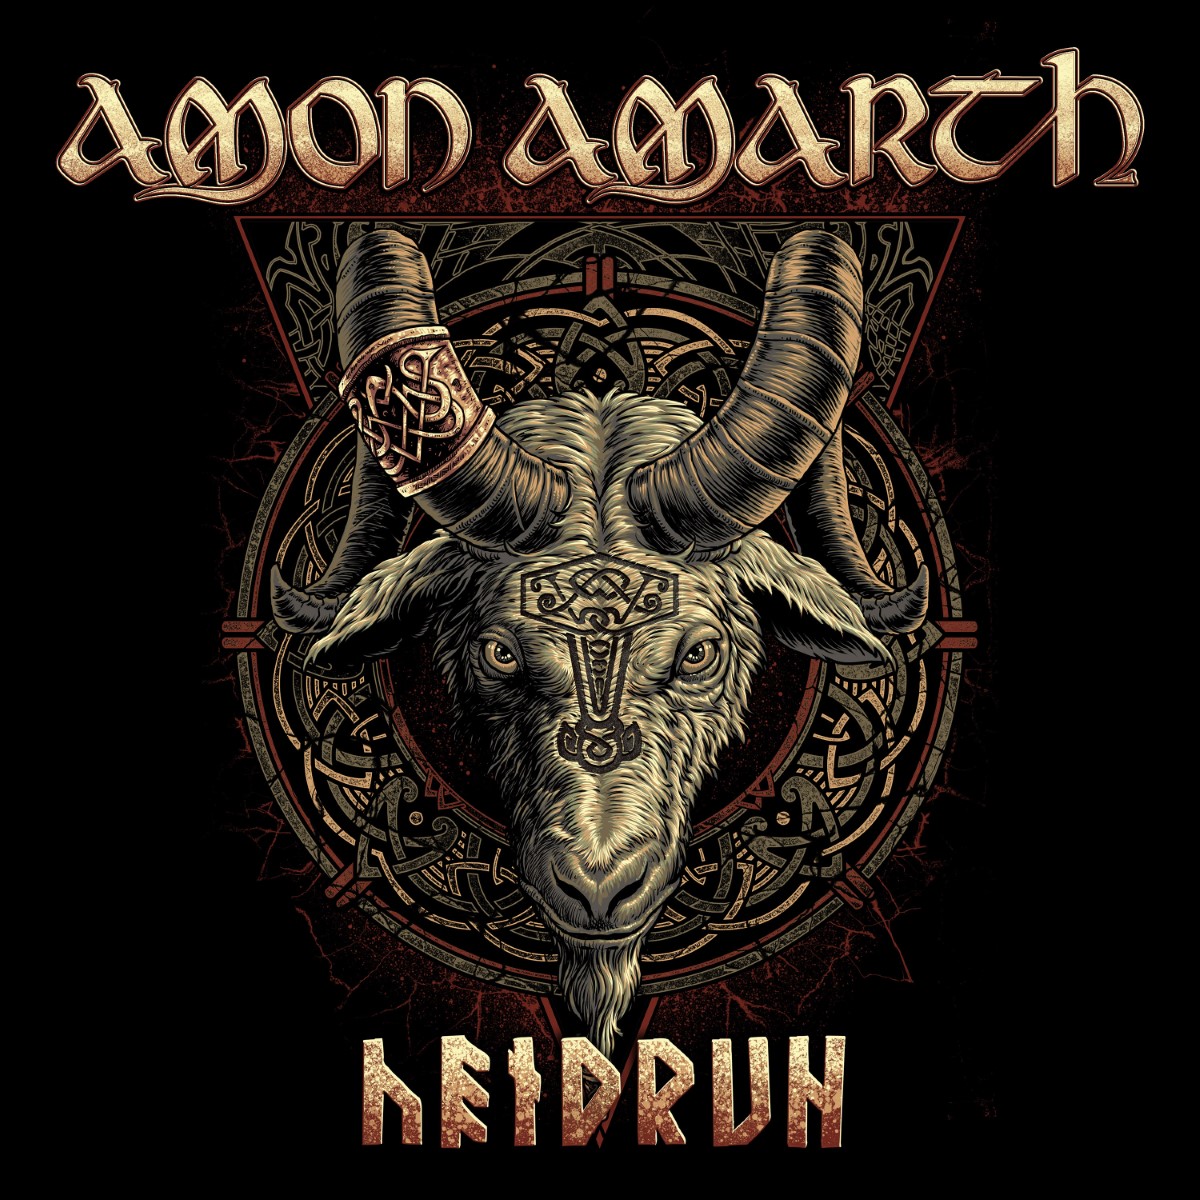 Swedish Viking Metal Band Amon Amarth Reported Dead in New